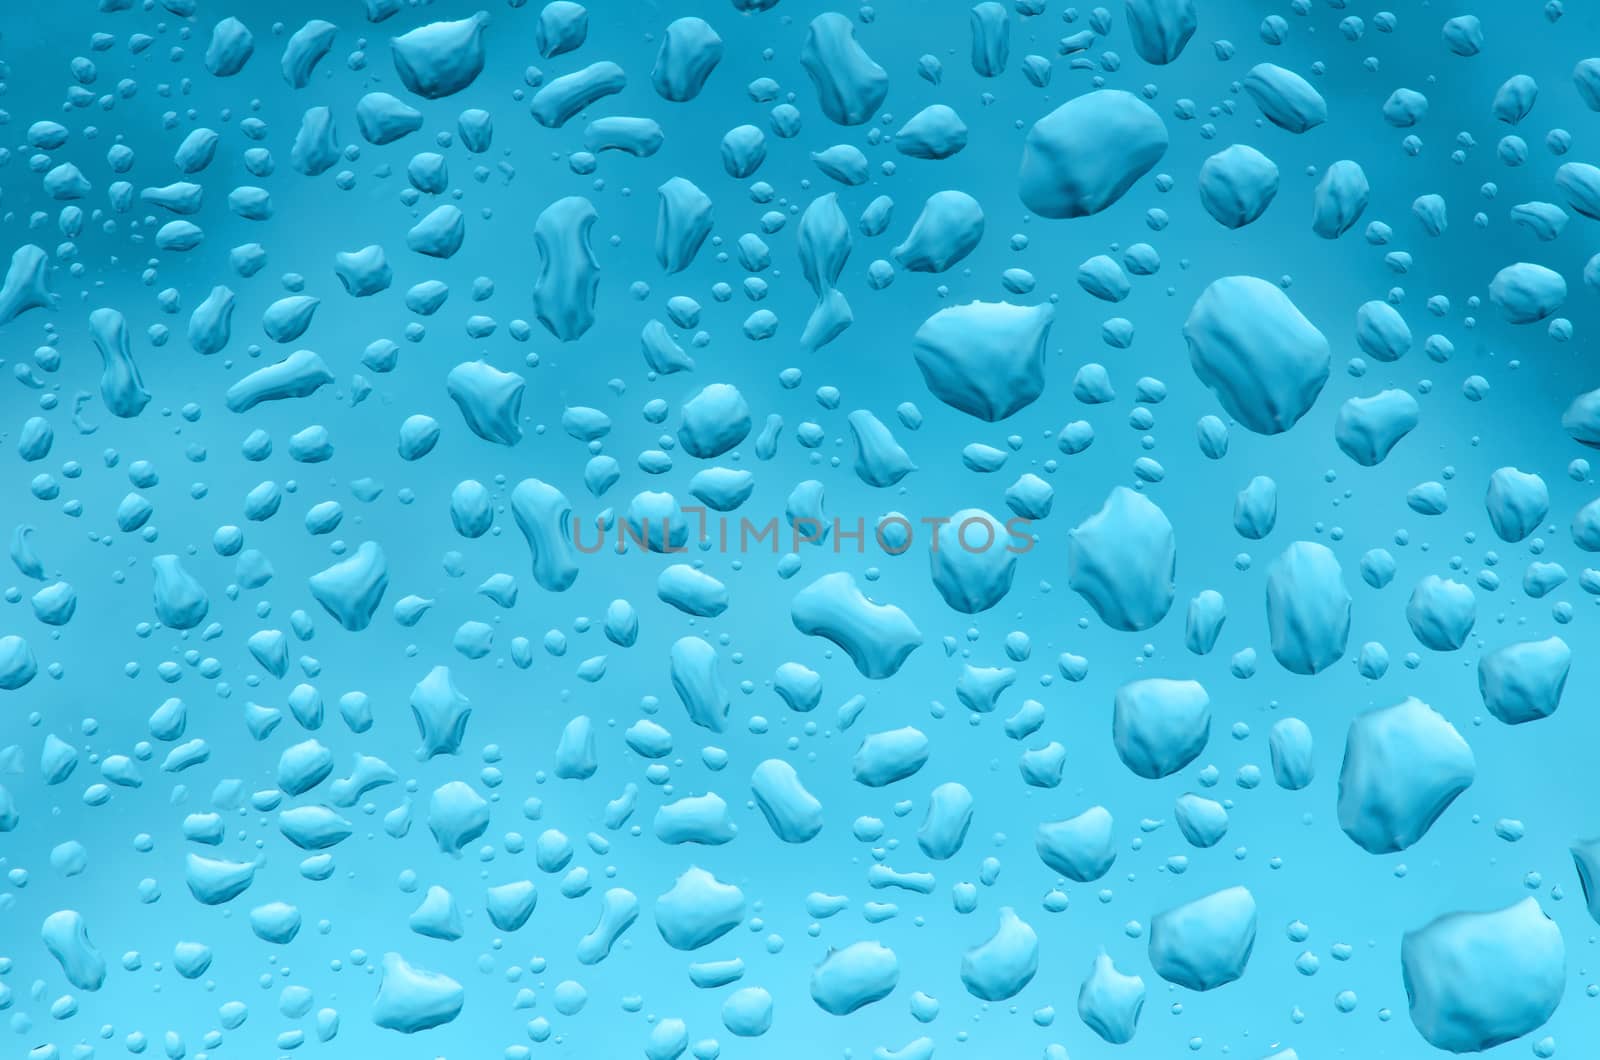 Water drops on blue background, natural pattern.